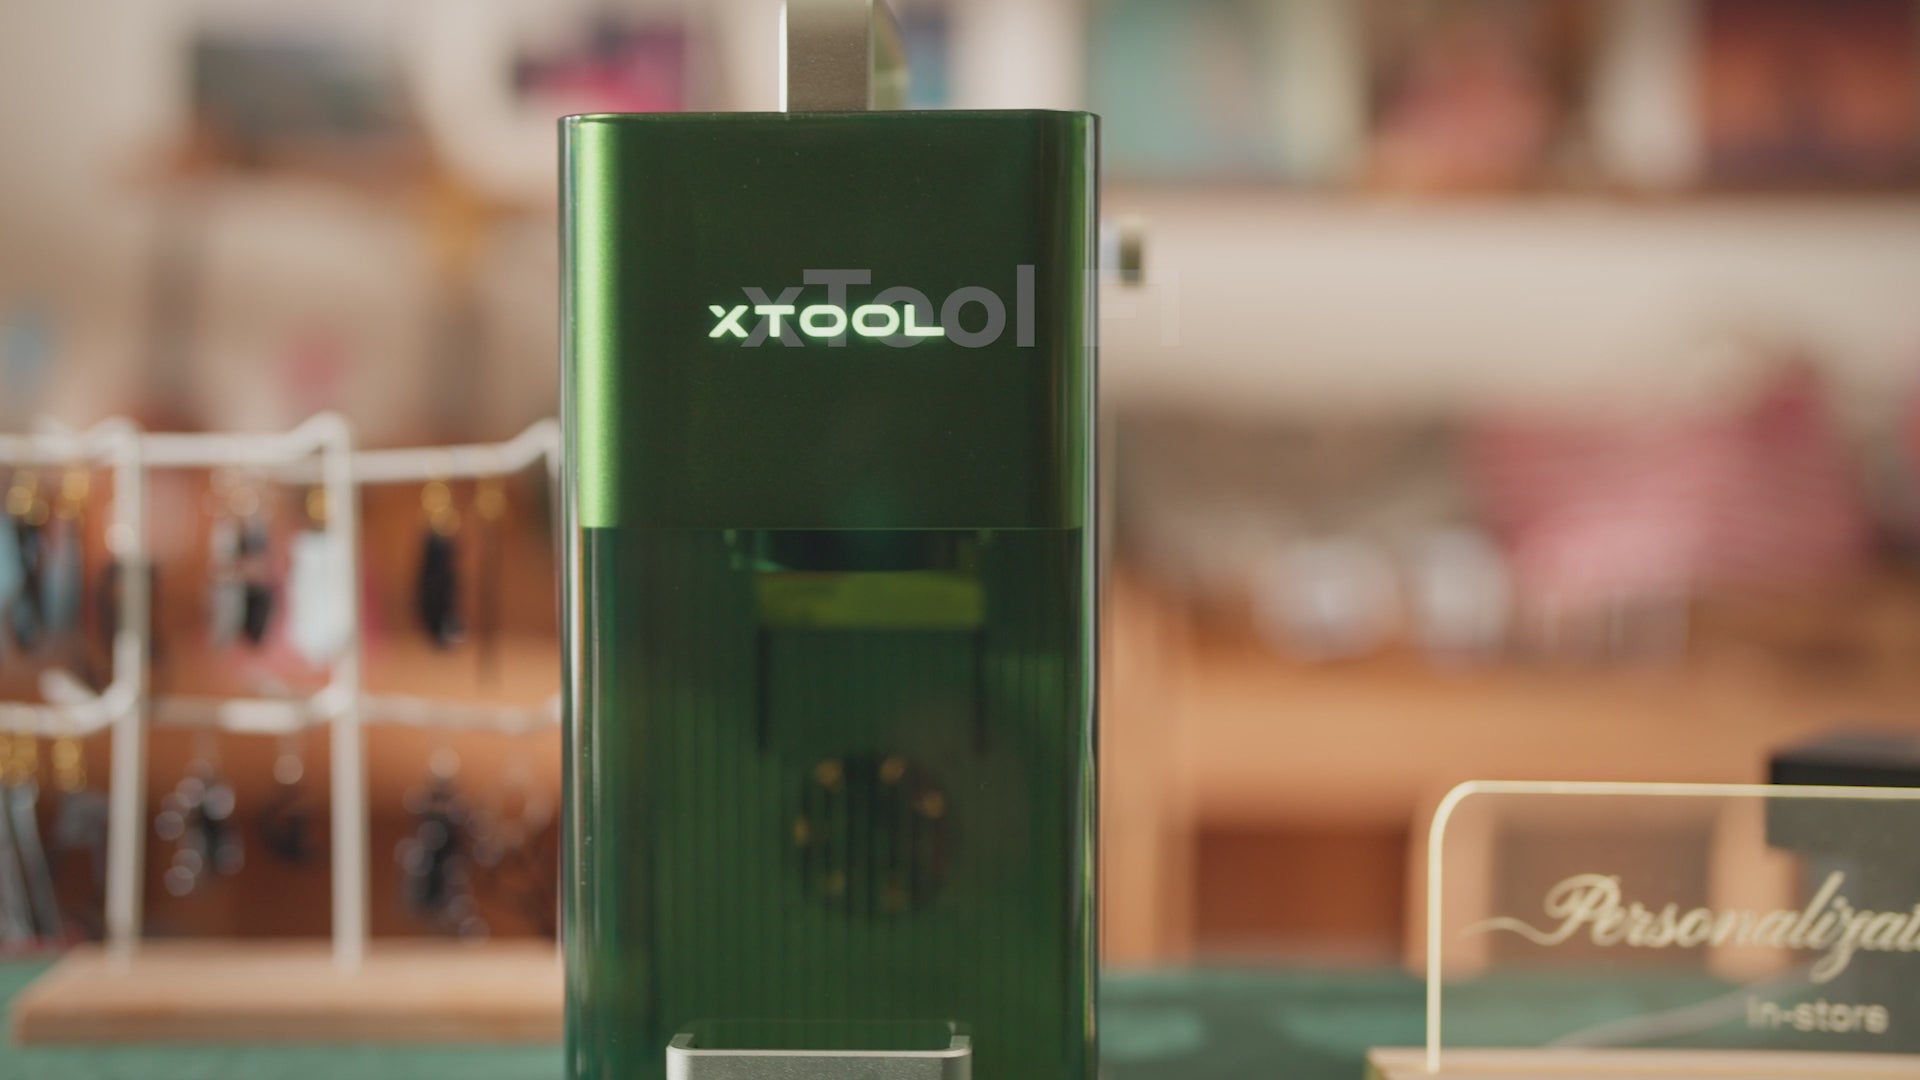 xTool F1: Fastest Portable Laser Engraver with IR + Diode Laser